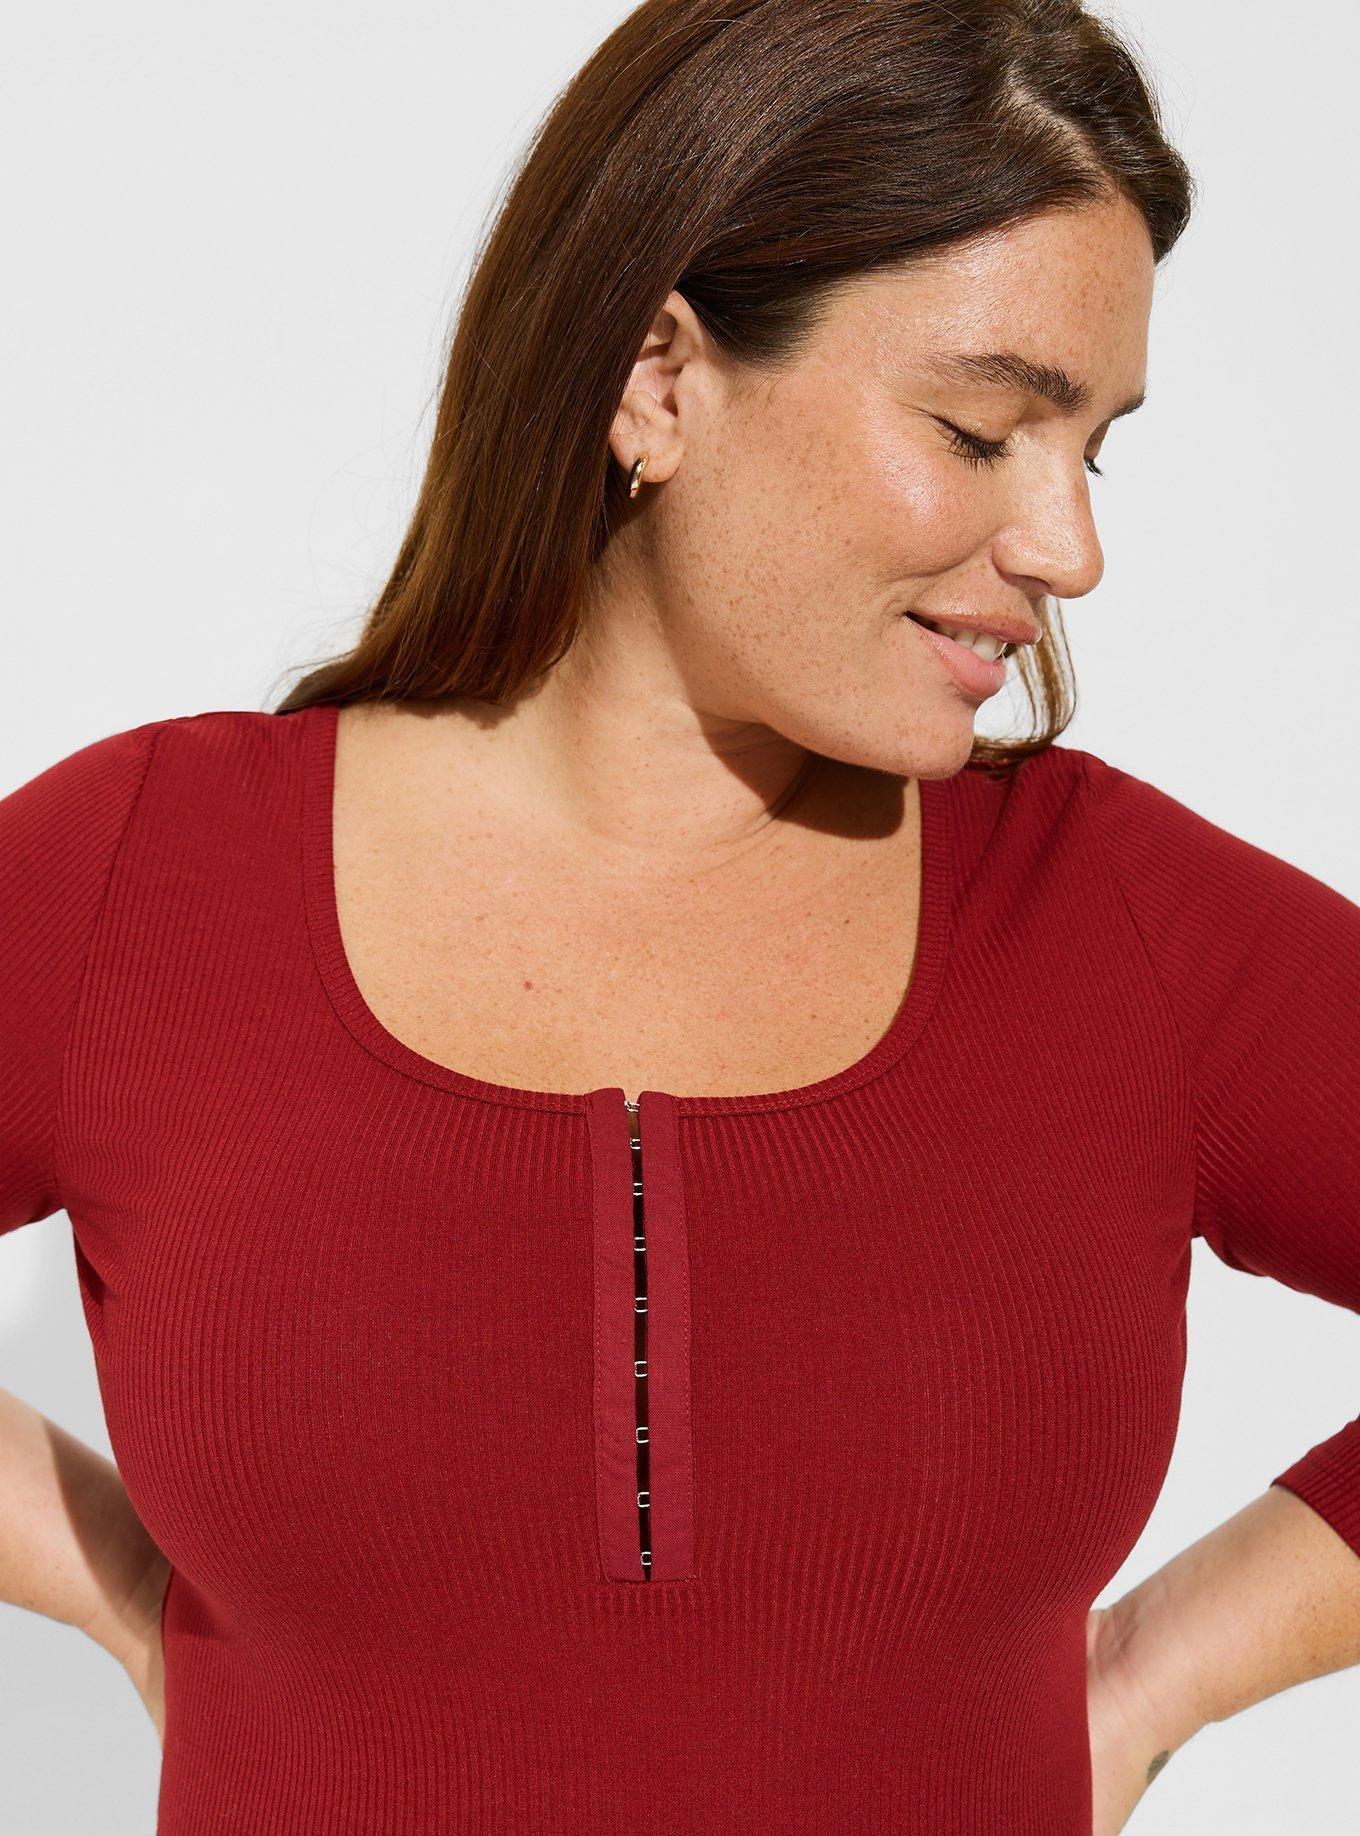 Plus Size - Super Soft Rib Scoop Neck Hook and Eye Long Sleeve Top